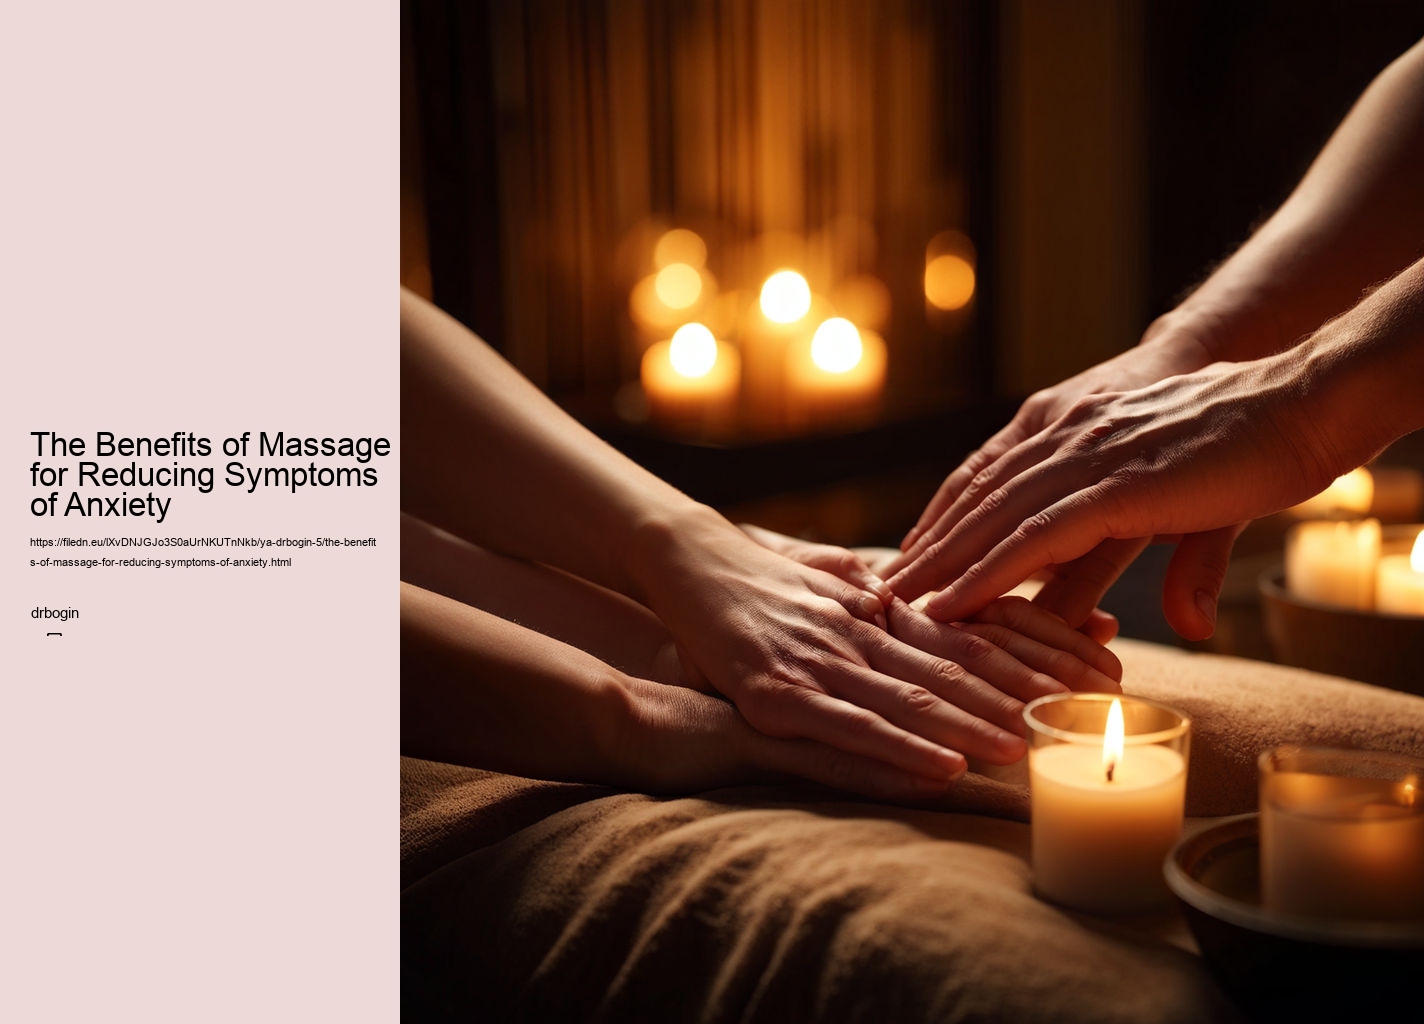 The Benefits of Massage for Reducing Symptoms of Anxiety